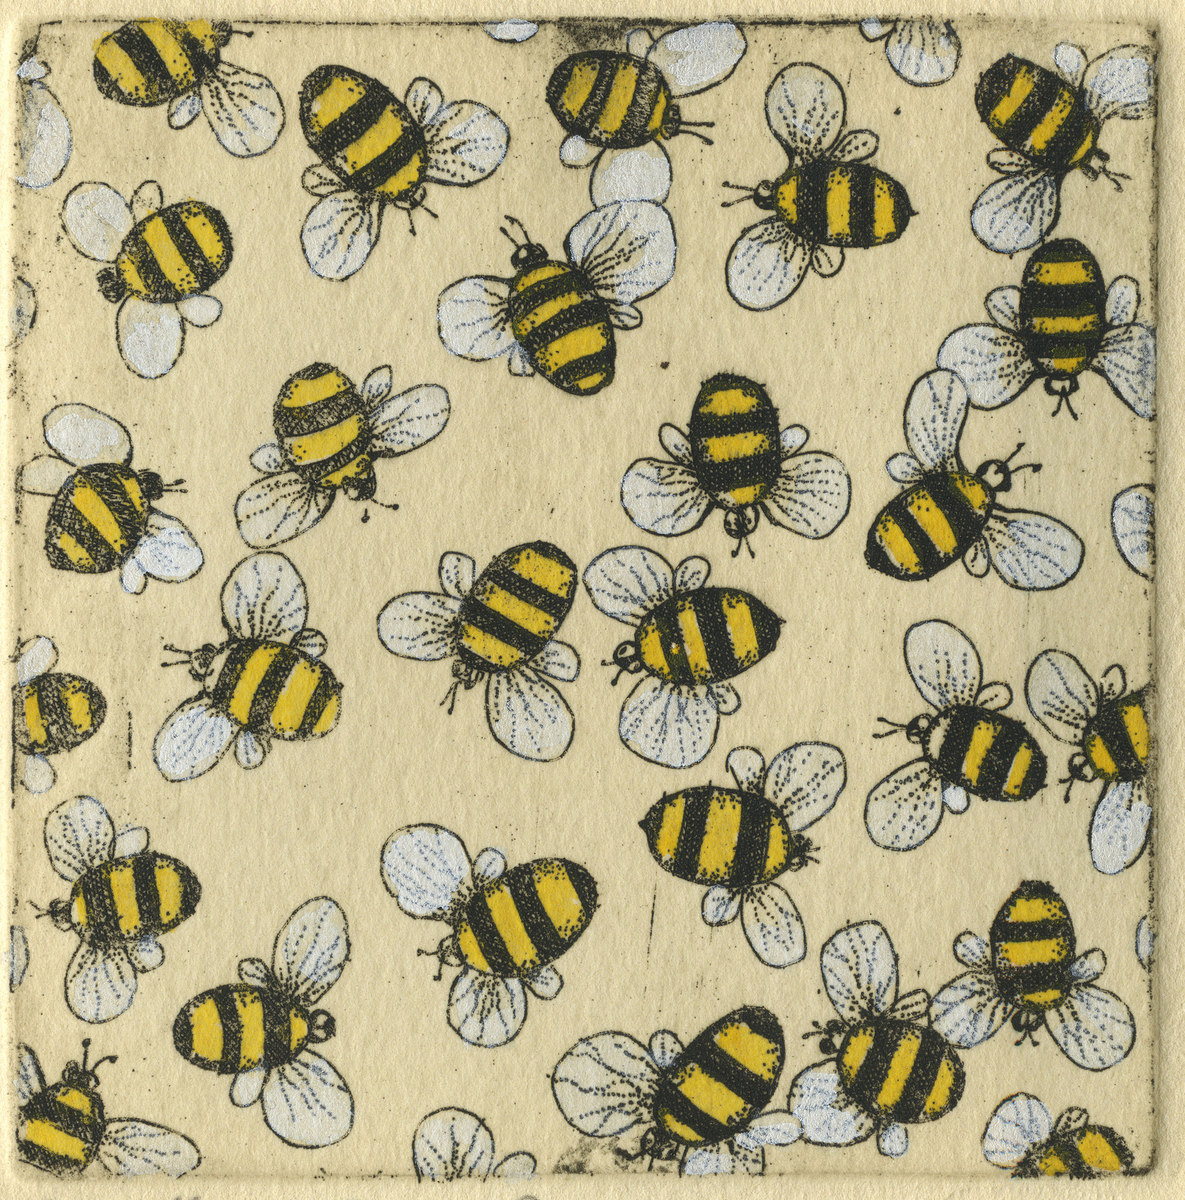 Congregated Creatures – Bees